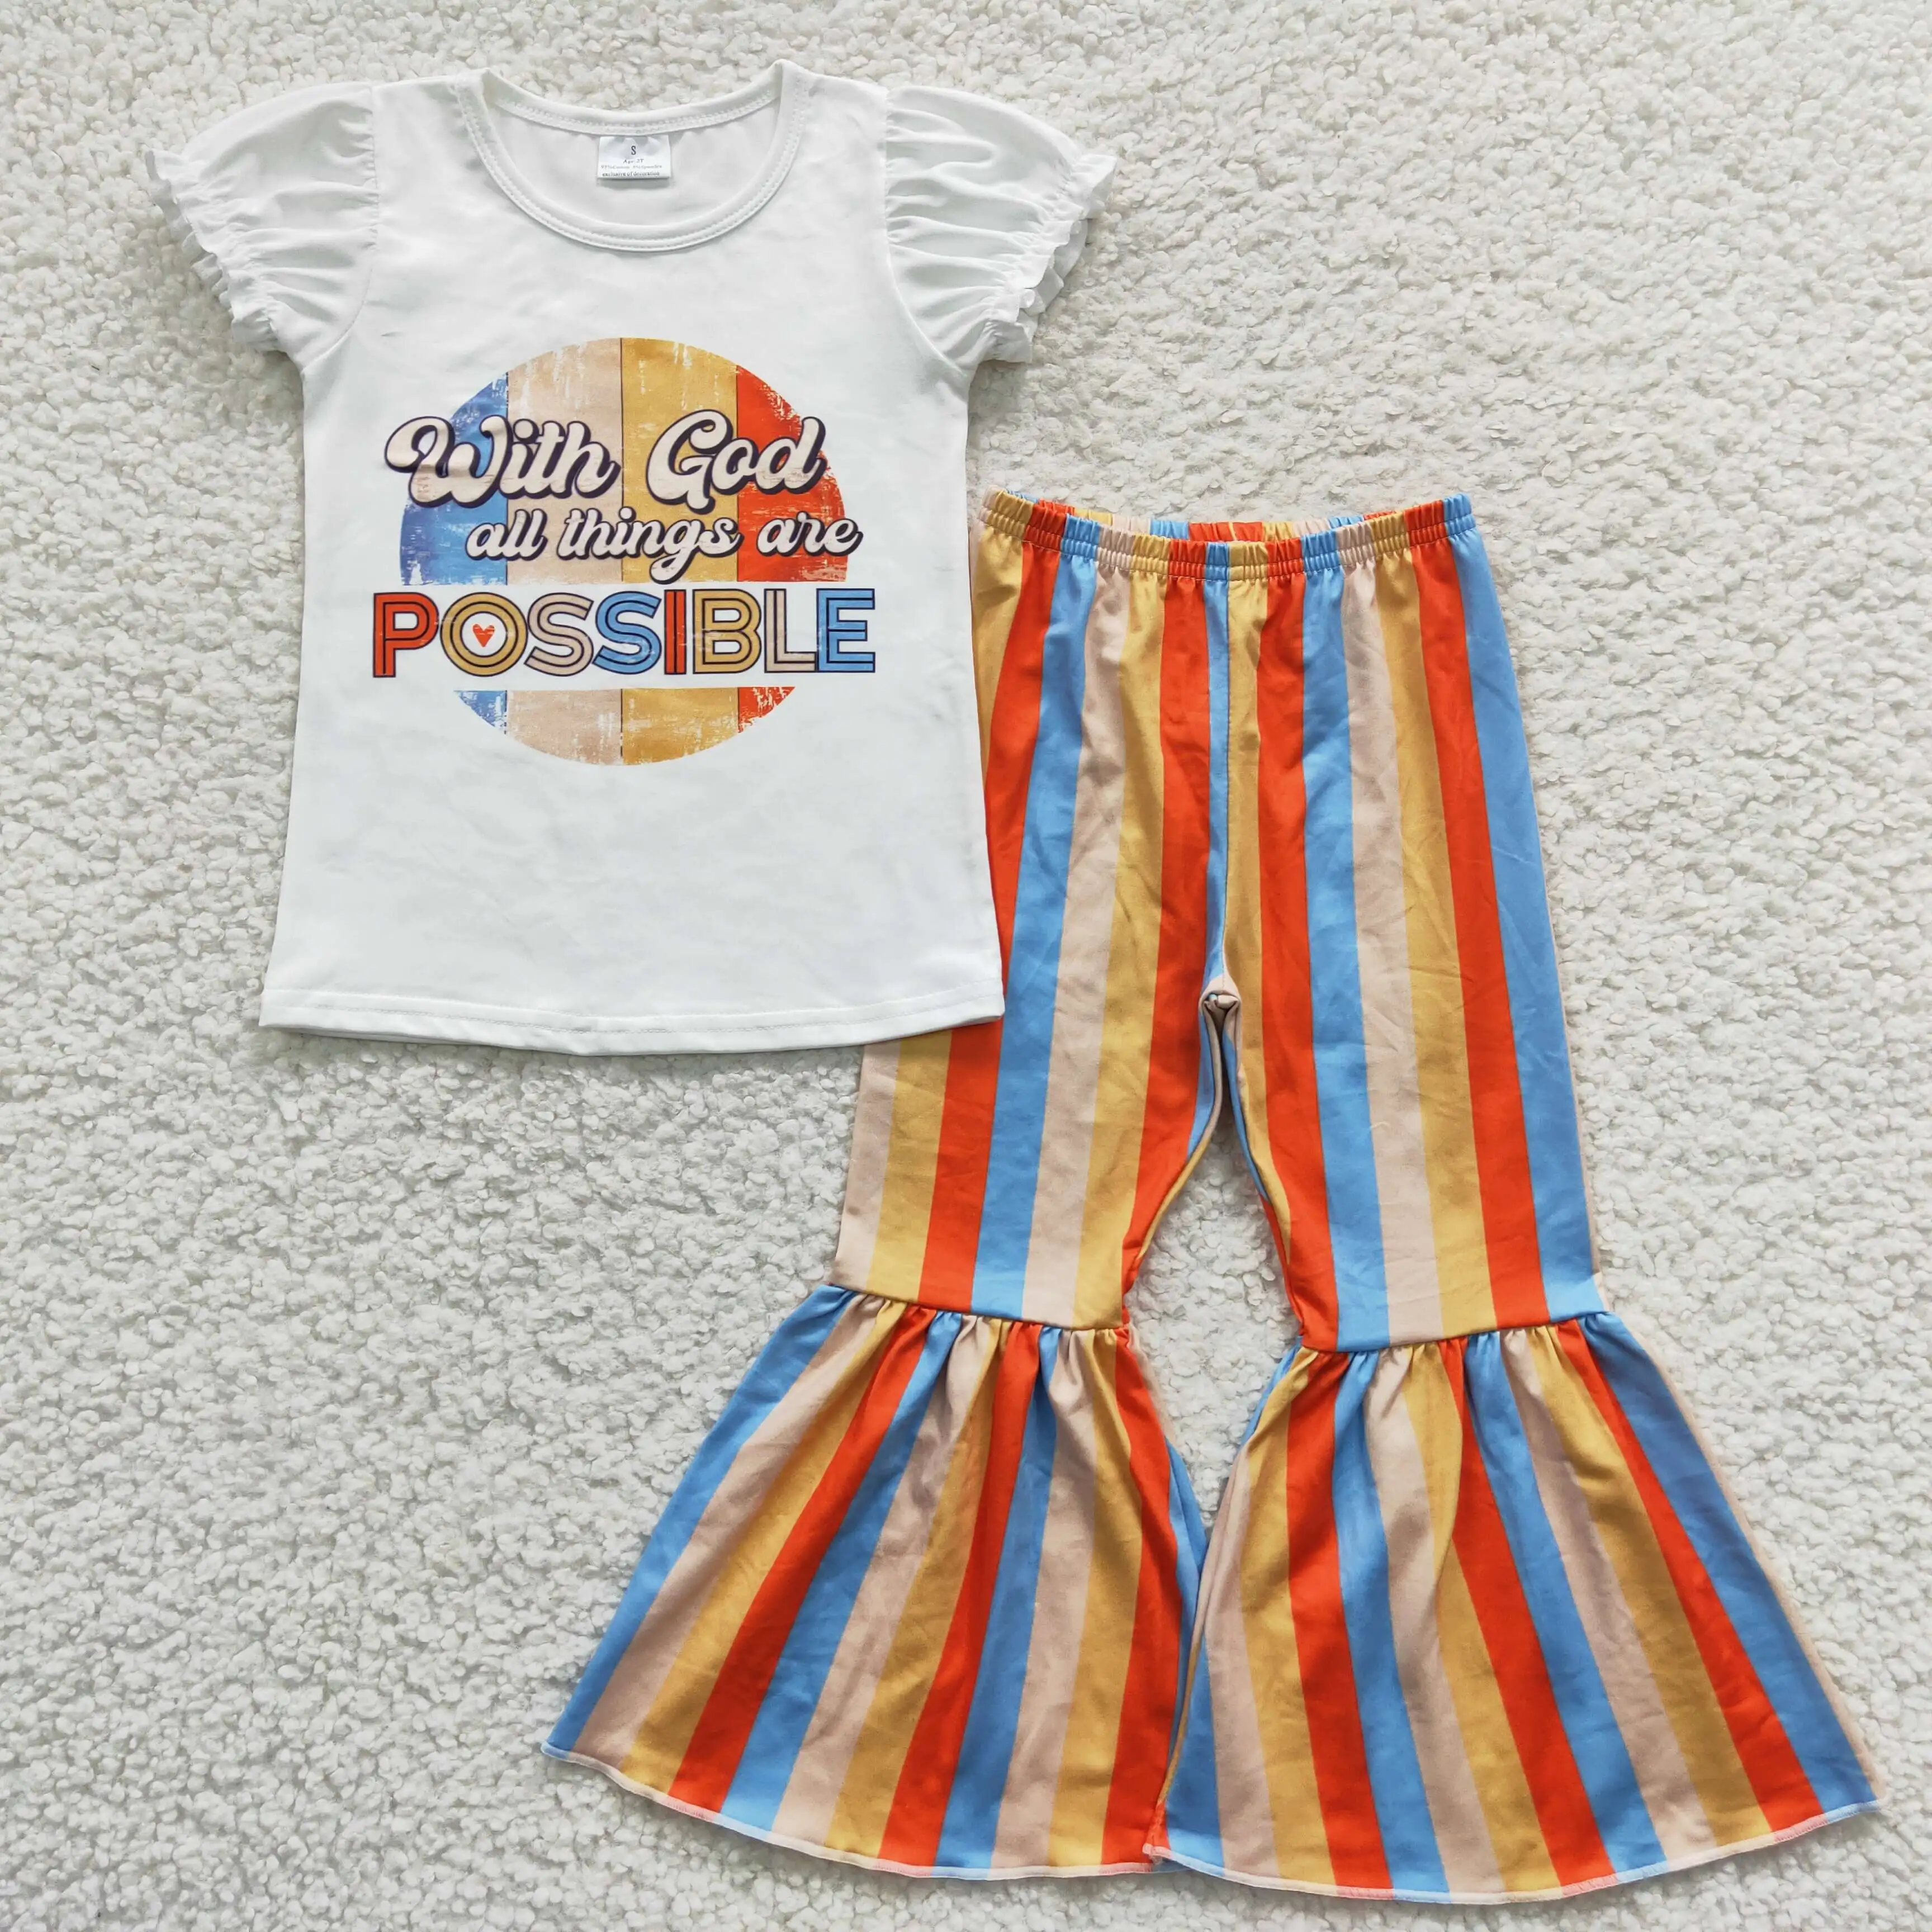 

Baby Girls God Possible Sets Clothing Boutique Kids Short Sleeves Bell Bottom Stripe Pants Outfits Children New Styles Clothes